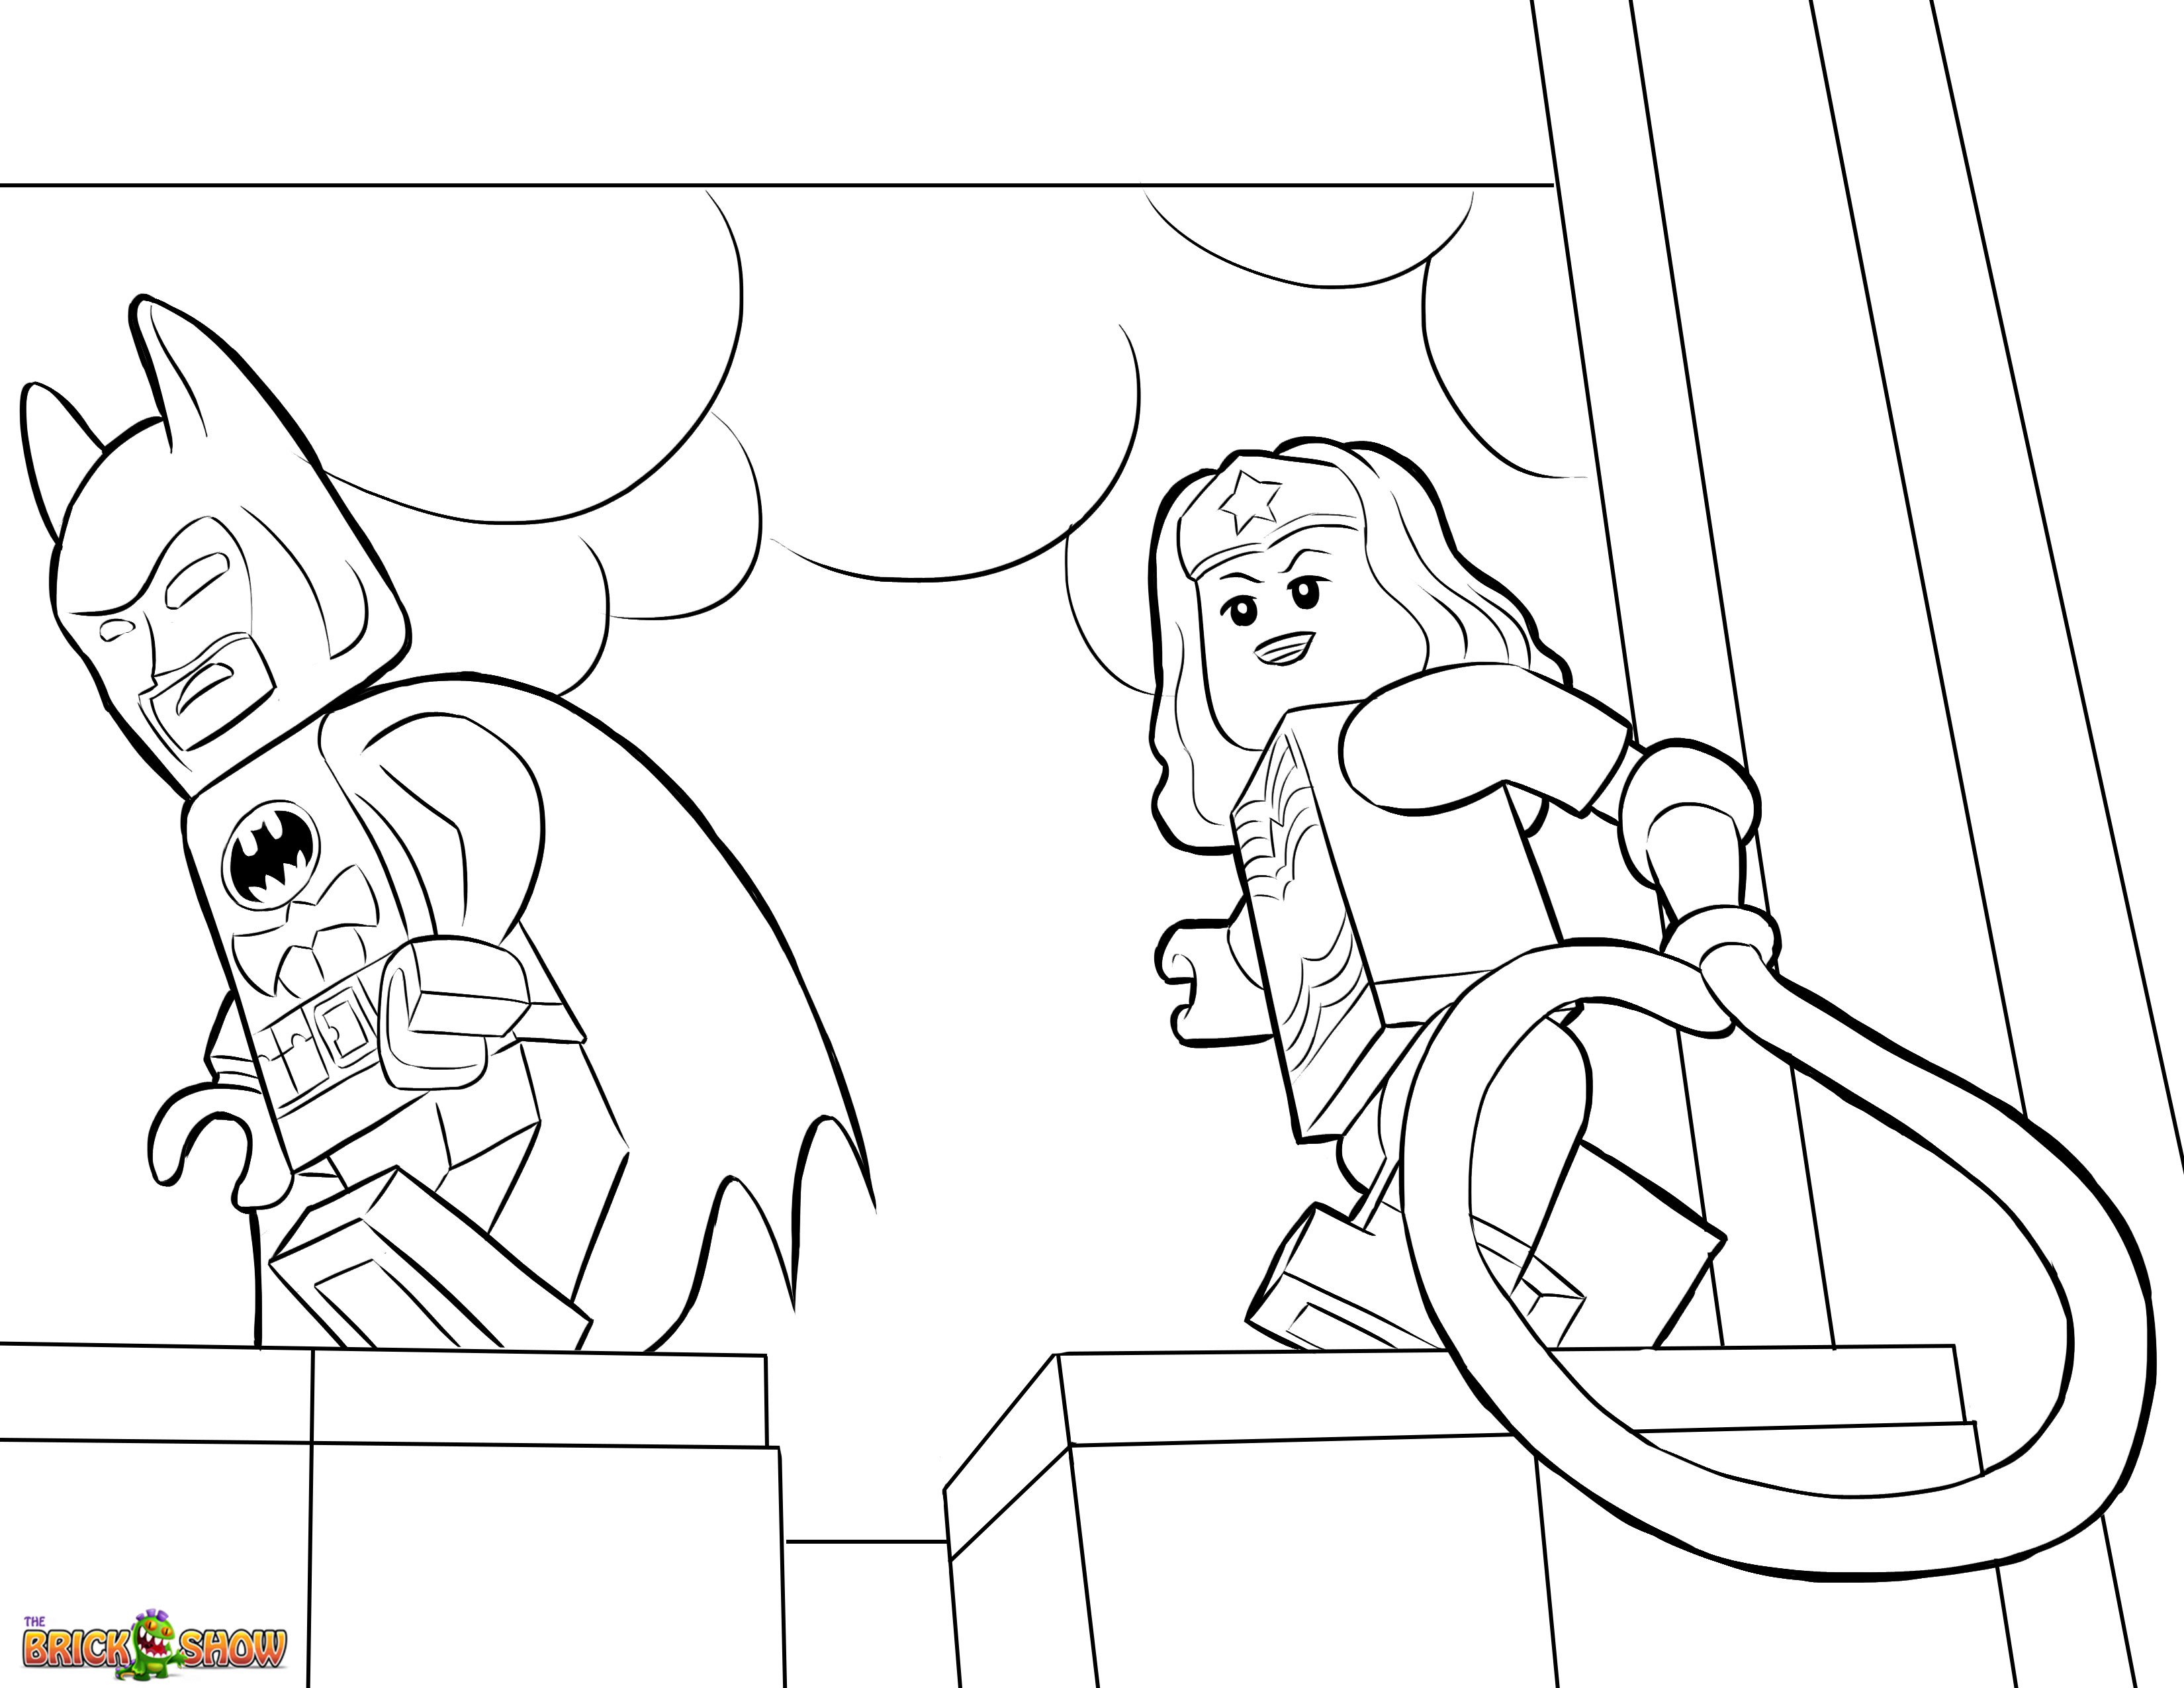 Lego Superman Printable Coloring Pages superman coloring page